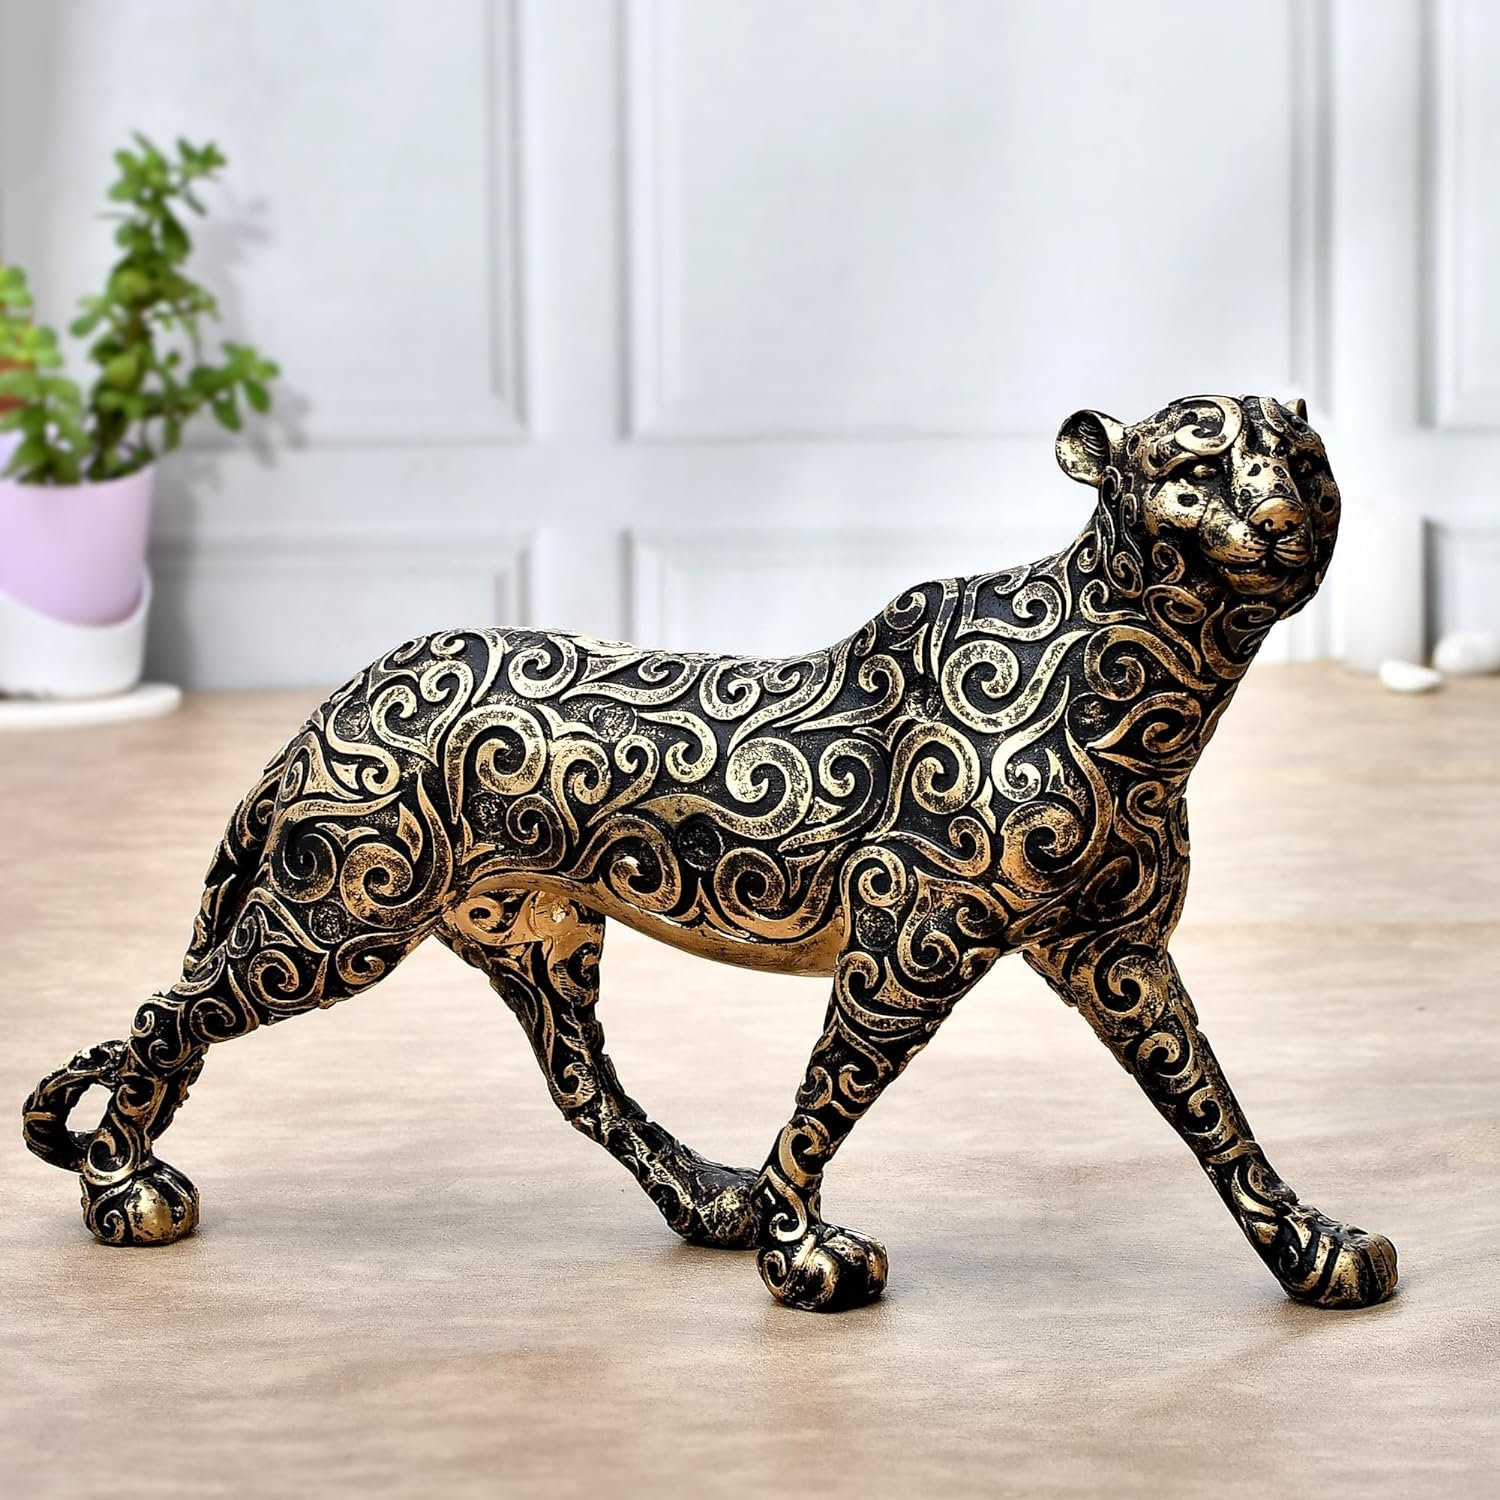 Wild Cheetah Statue in Gold Metal Finish – Floral Petals of